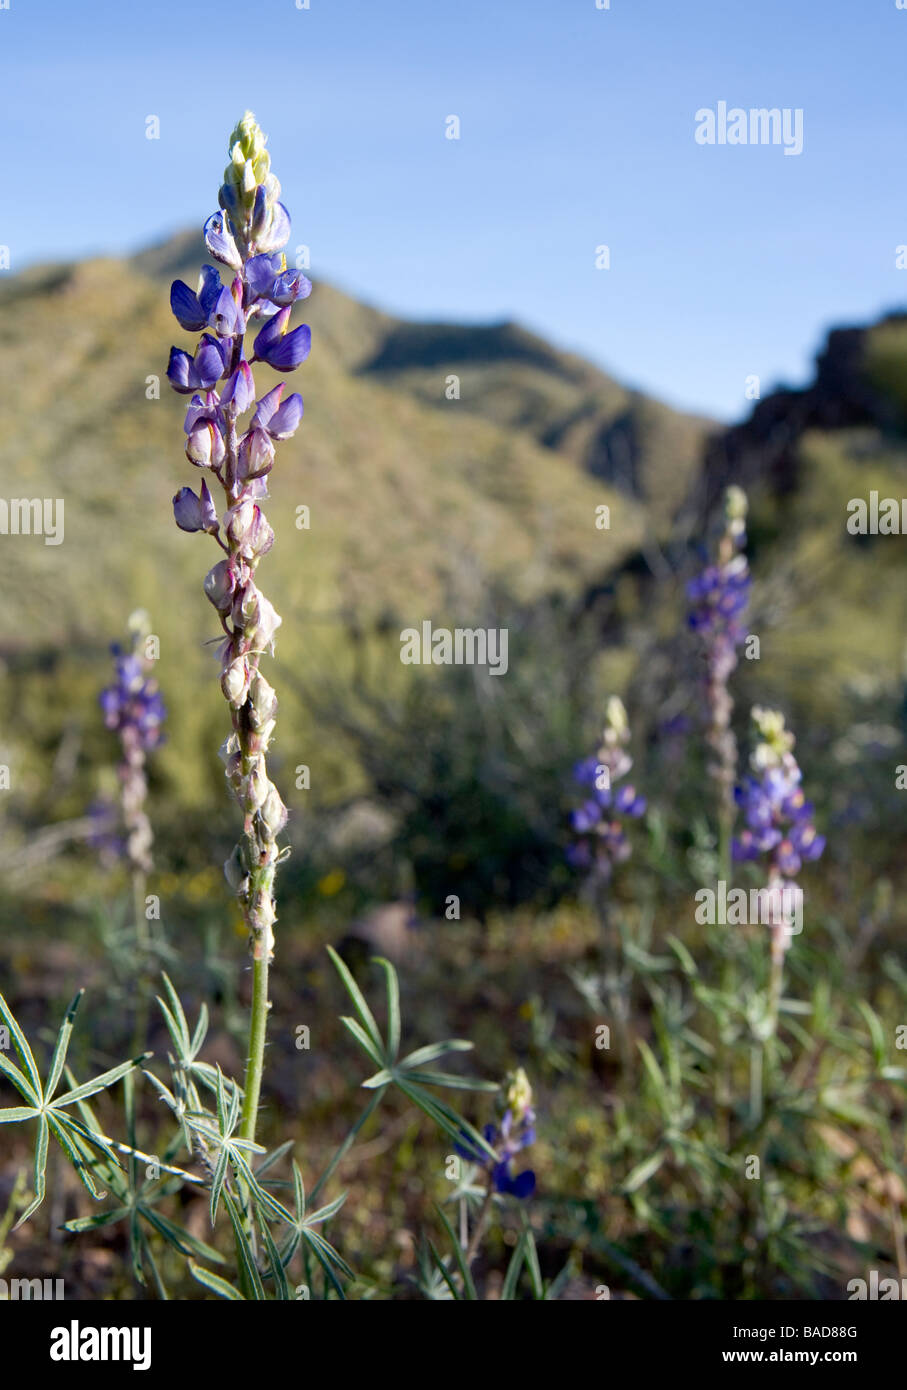 Desert Lupine also called Coulter's Lupine Lupinus sparsiflorus These were in Arizona They are a member of the Pea family Stock Photo